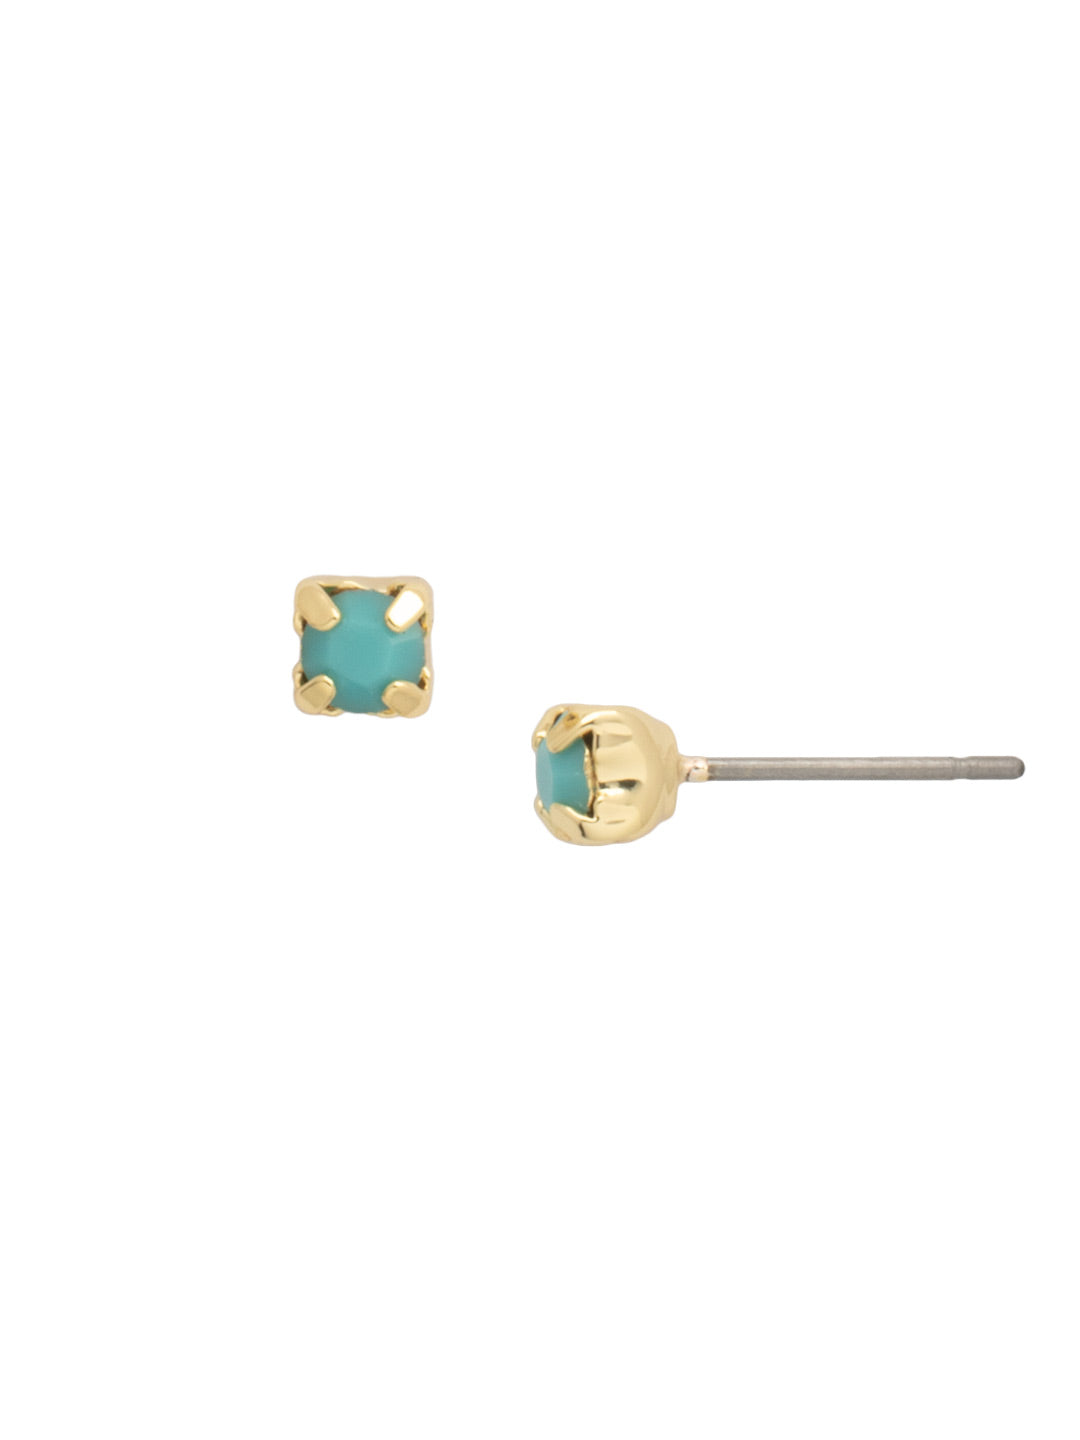 June Stud Earrings - EDN33BGSTO - <p>The June Stud Earrings feature a tiny round cut crystal on a post, perfect to wear alone for a touch of sparkle or layered in your ear for a trendy, layered look. From Sorrelli's Santorini collection in our Bright Gold-tone finish.</p>